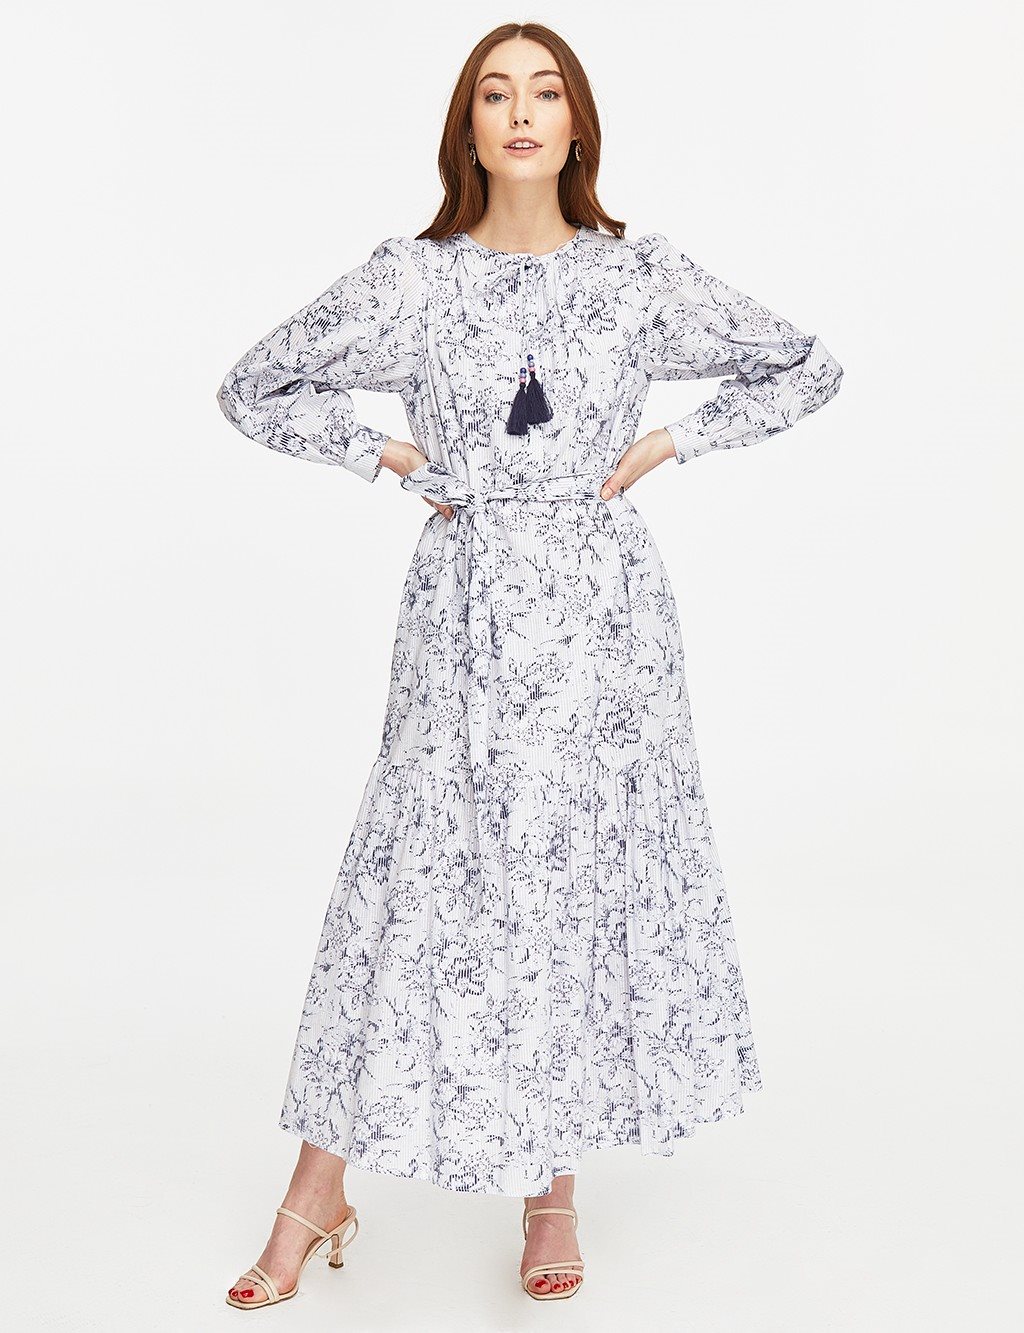 Floral Patterned Ruffle Dress Navy-Grey